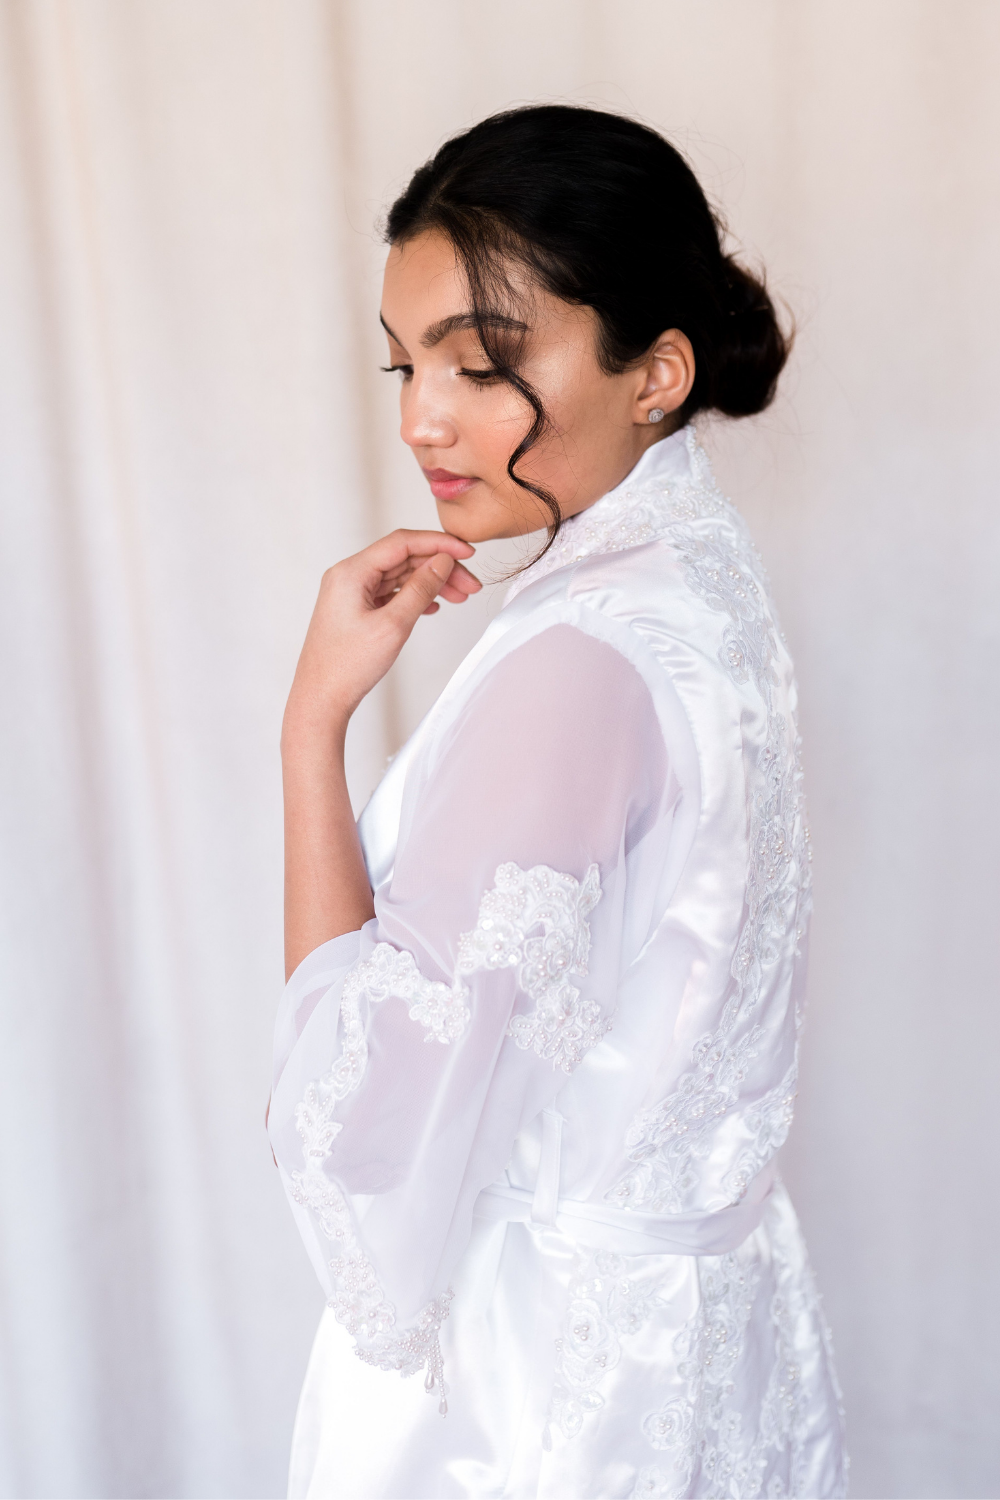 Wedding Robes For Brides Made From Mom's Wedding Dress | Unbox the Dress